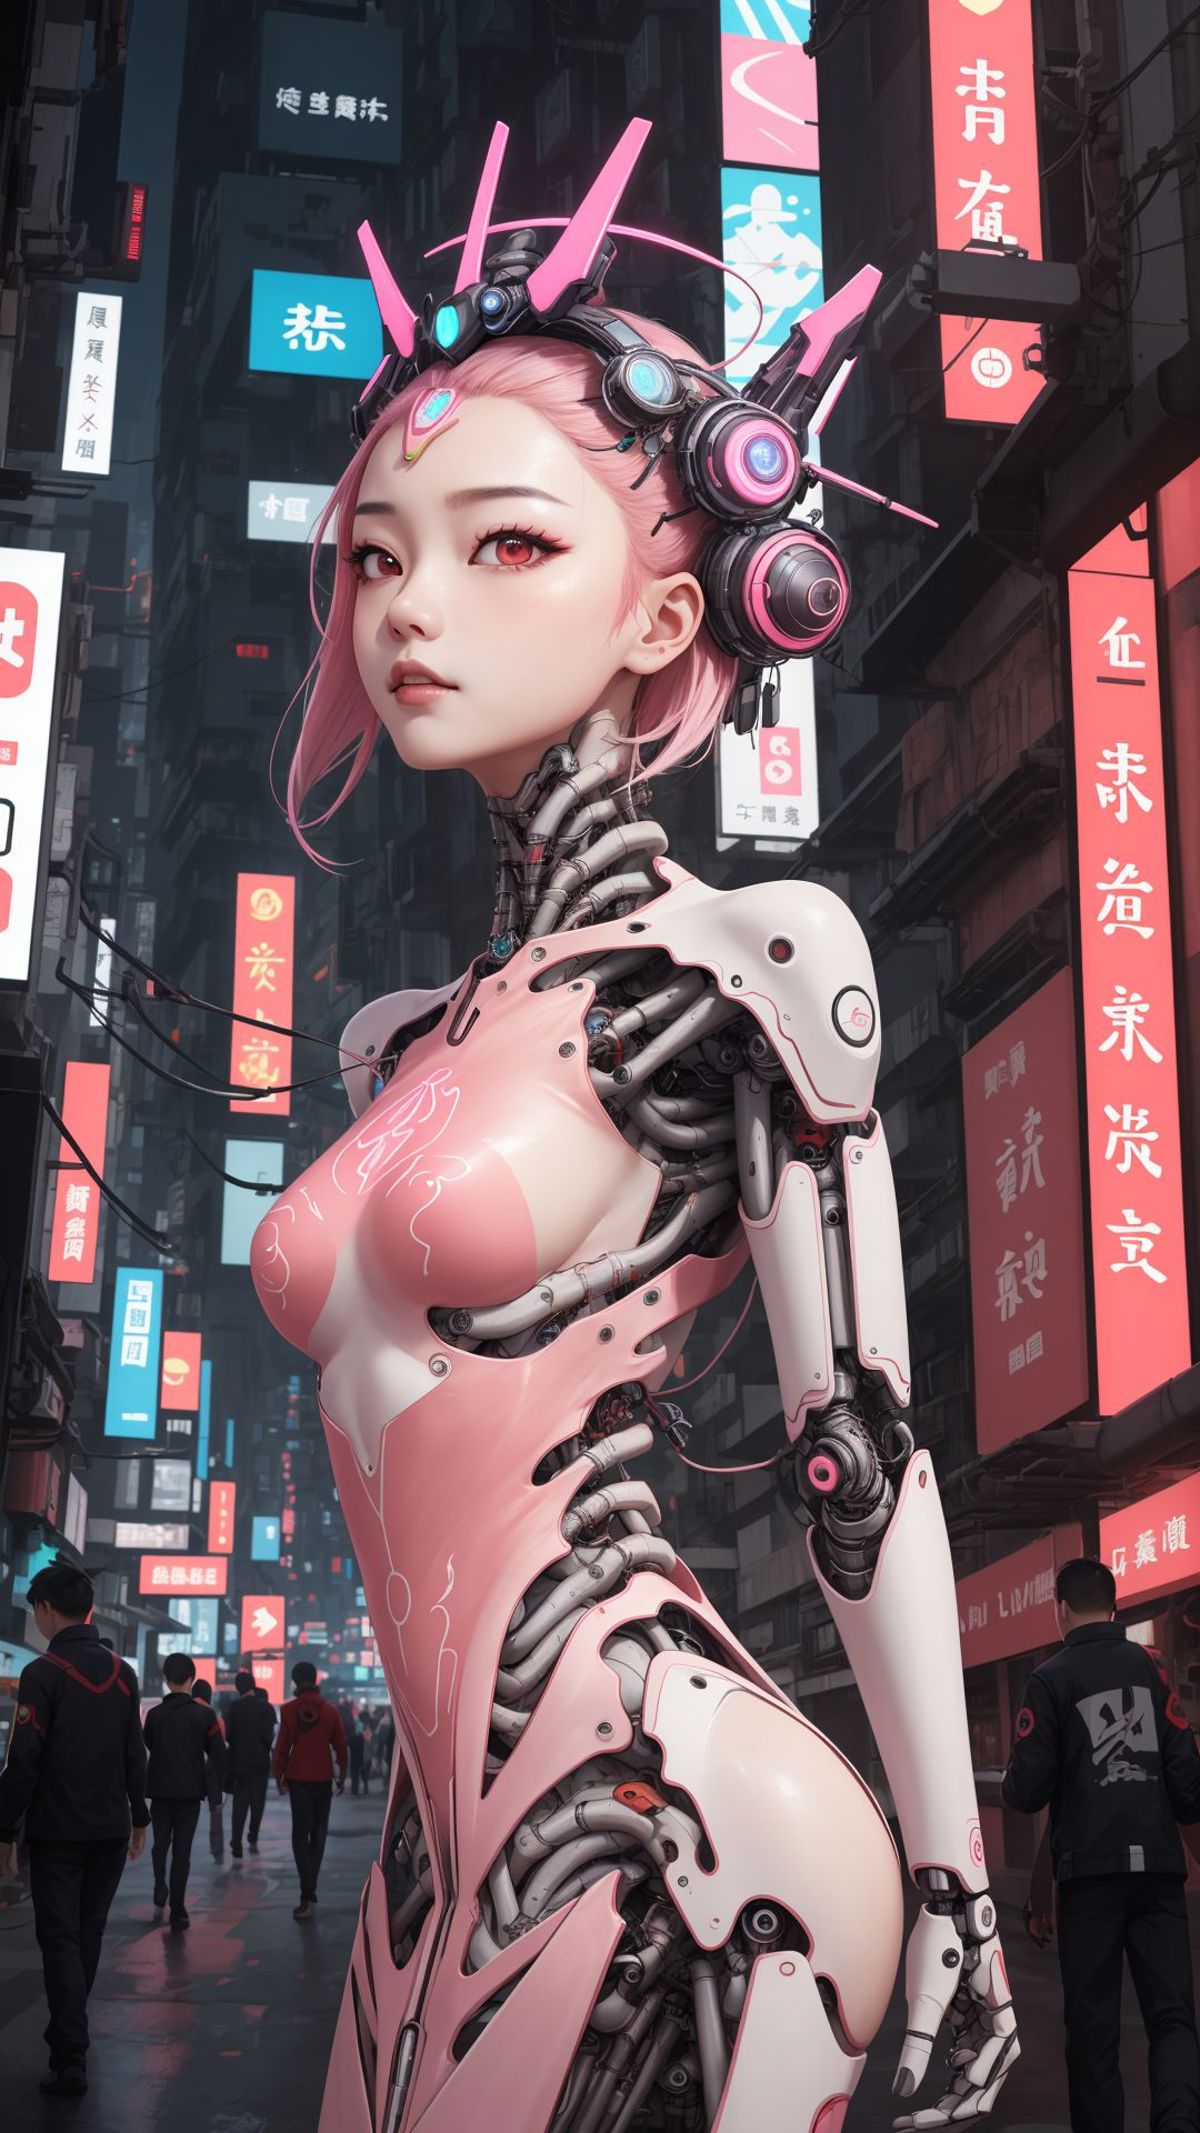 Translucent skin mechanical girl image by marusame